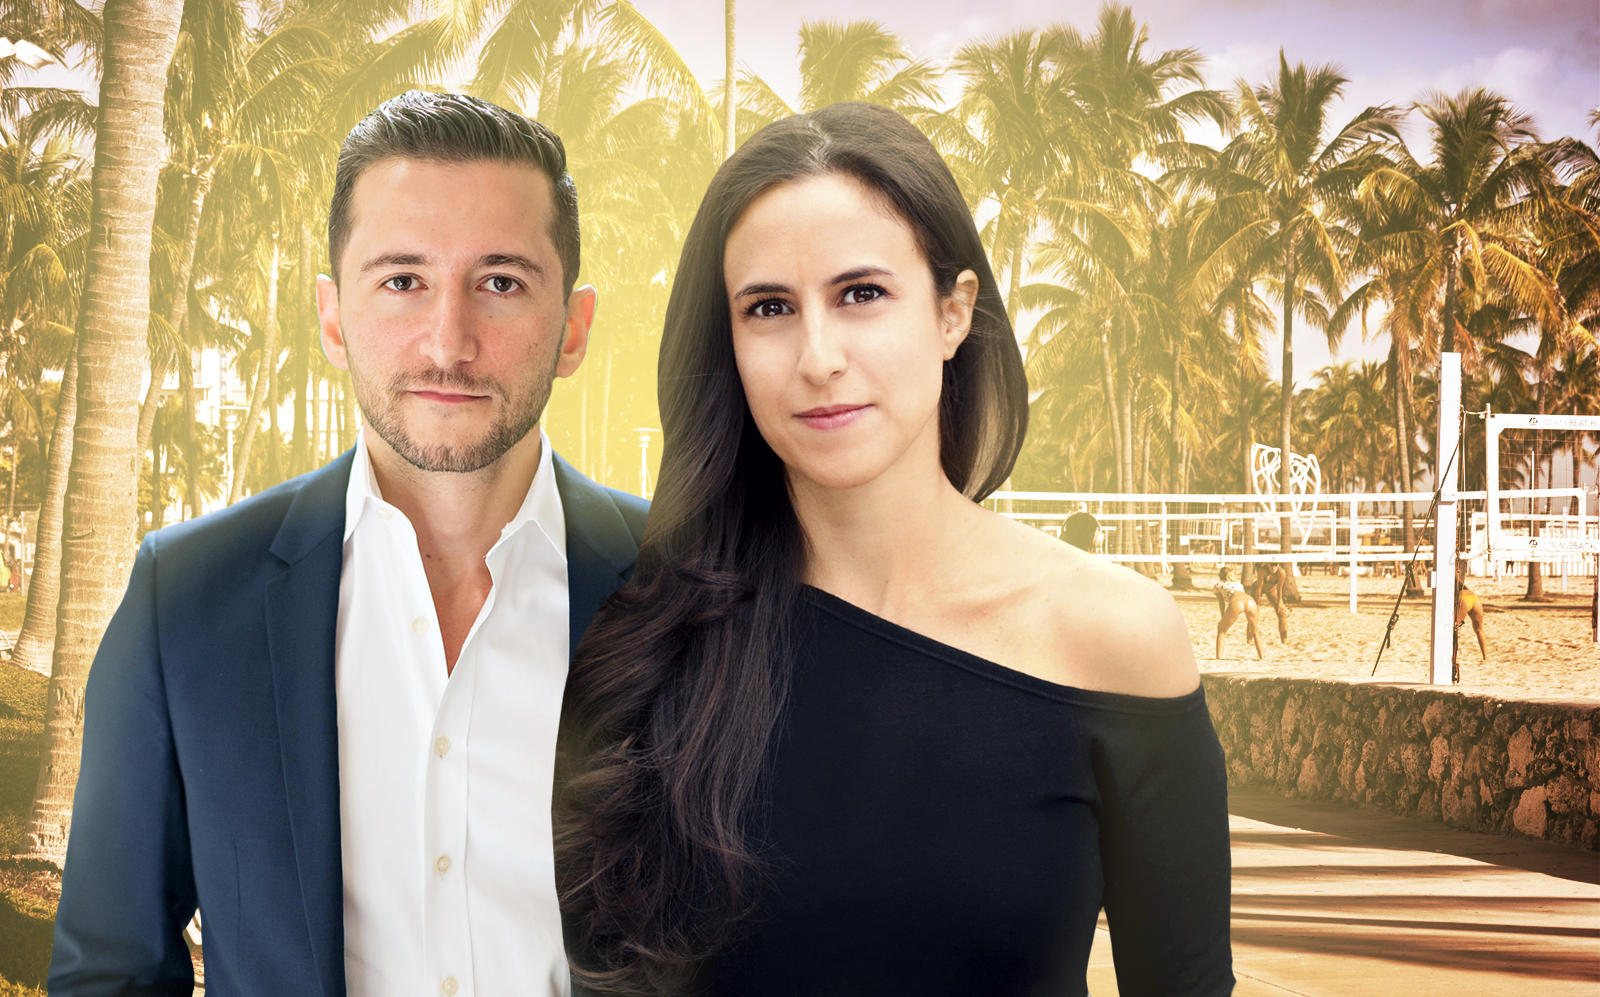 Ruthie and Ethan Assouline lead Compass’ Assouline Team. (The Assouline Team, iStock)